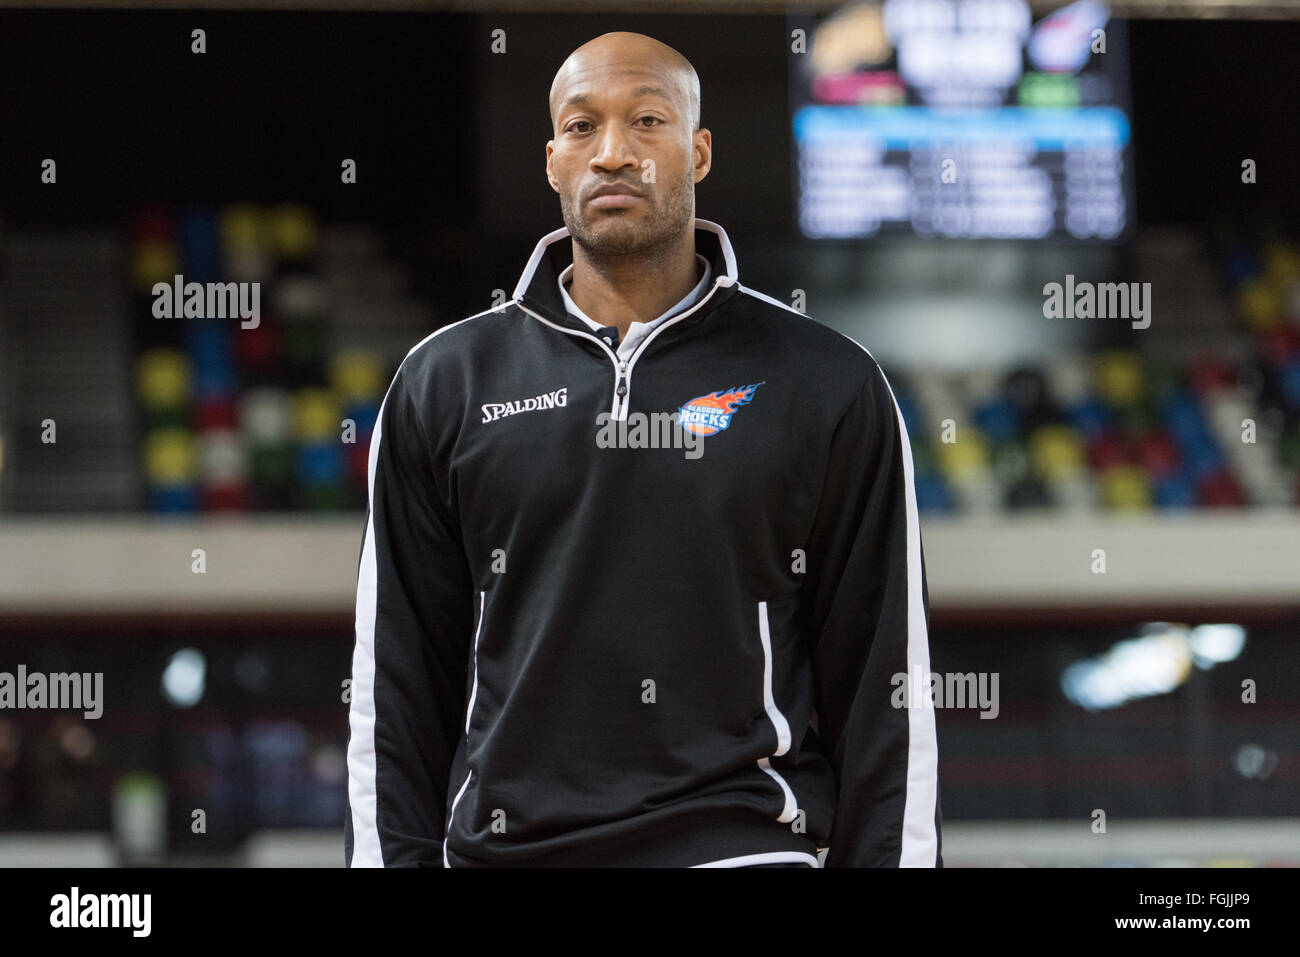 London, England, 20 February 2016. Glasgow Rocks Sterling Davis (Coach) looking all serious during the game.  BBL game at the Copper Box Arena in the Olympic Park. London Lions lost to Glasgow Rocks 81 vs 80. Credit: pmgimaging/Alamy Live News Stock Photo